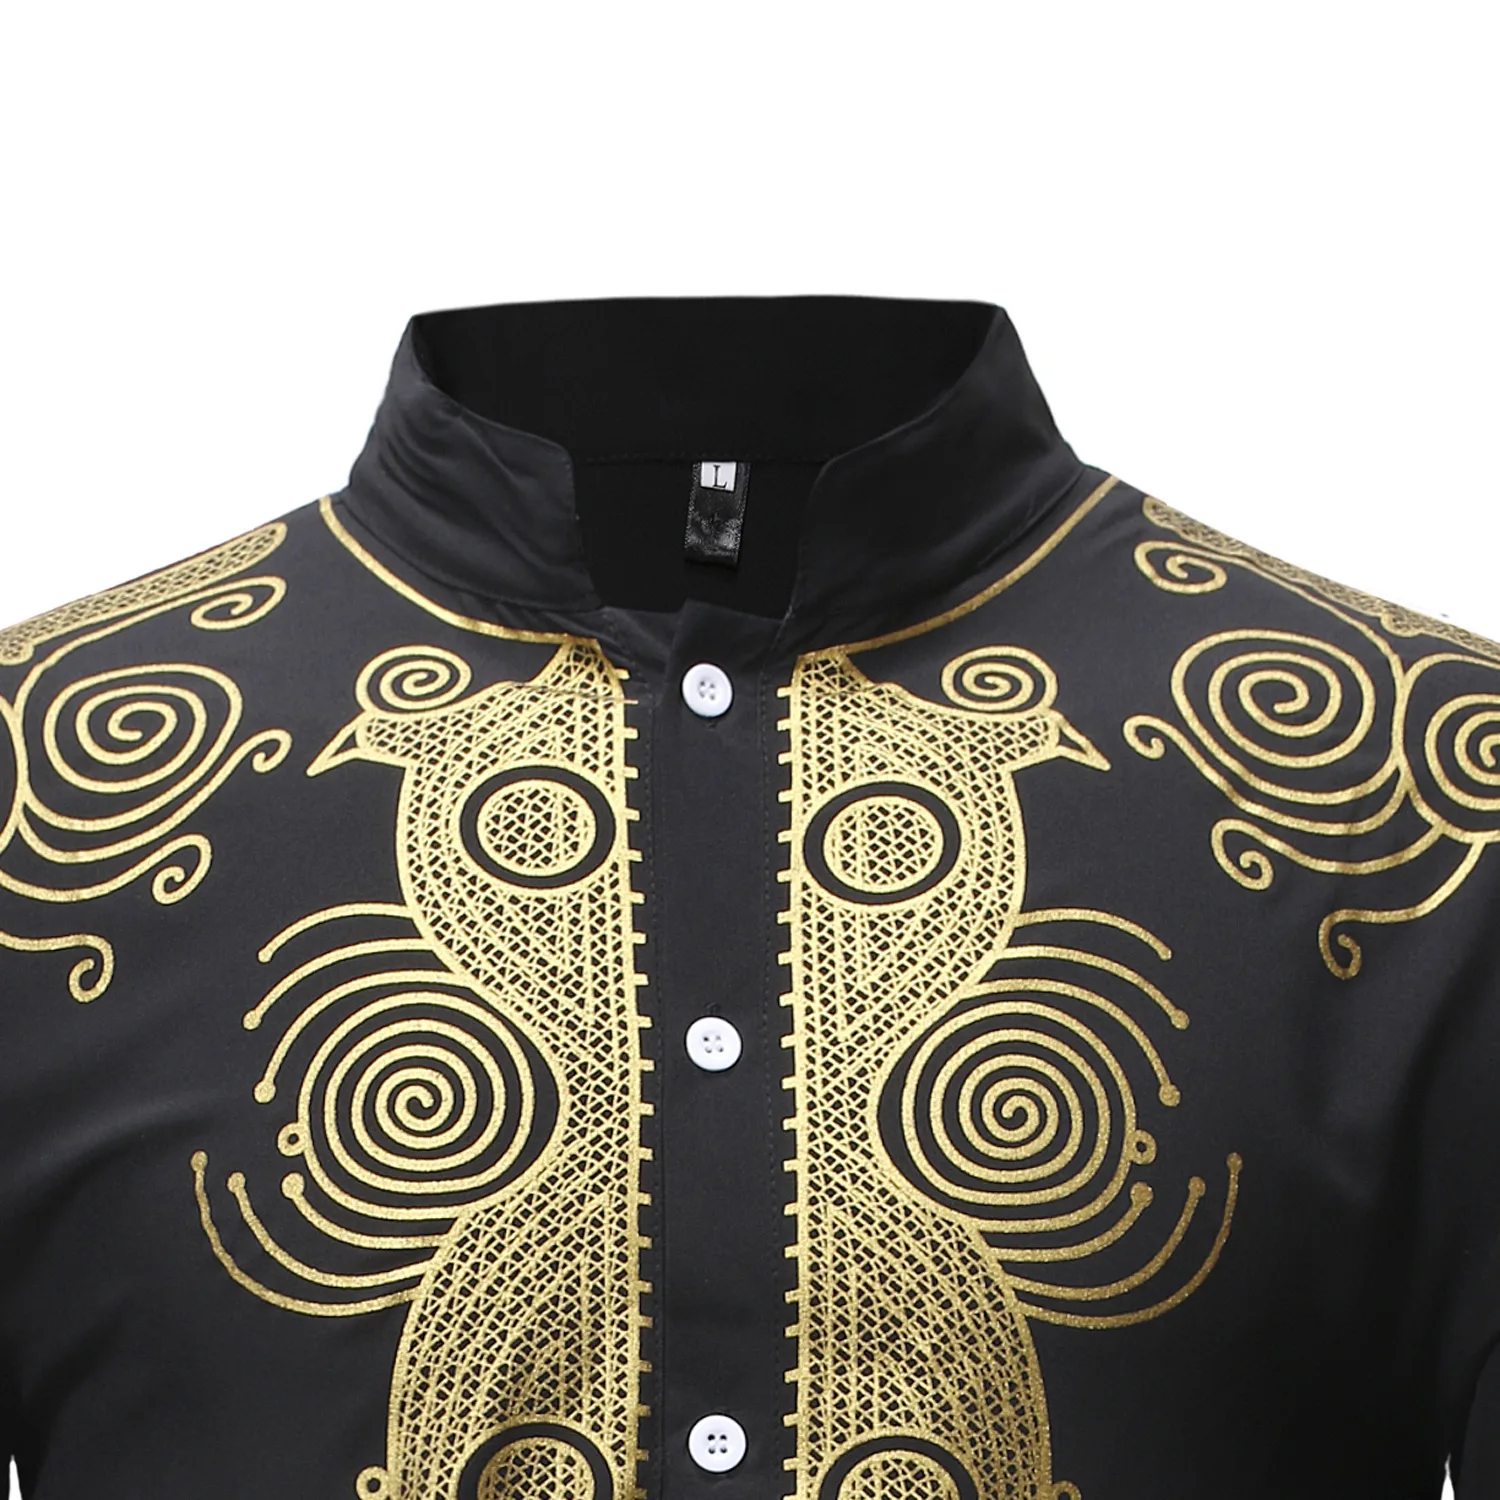 Men’s Casual African Dashiki Print Two Piece Outfit Long Sleeve Slim Fit Hipster Shirt Pants Set 